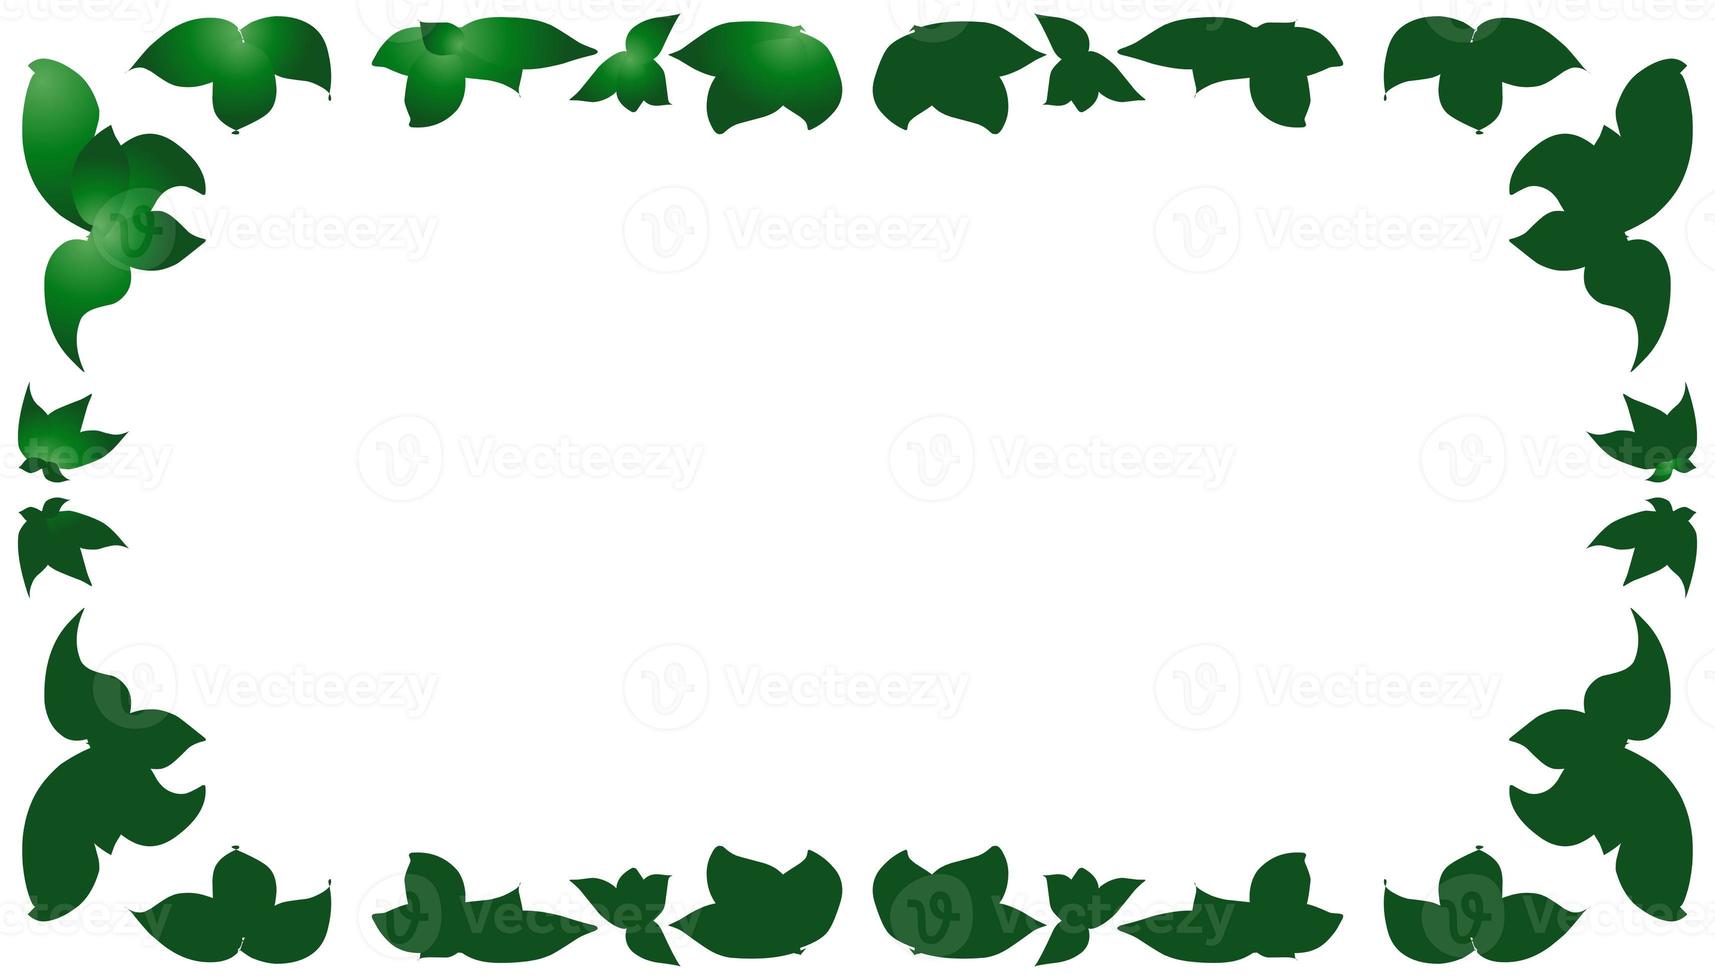 Abstract background with gradient green leaf pattern frame photo